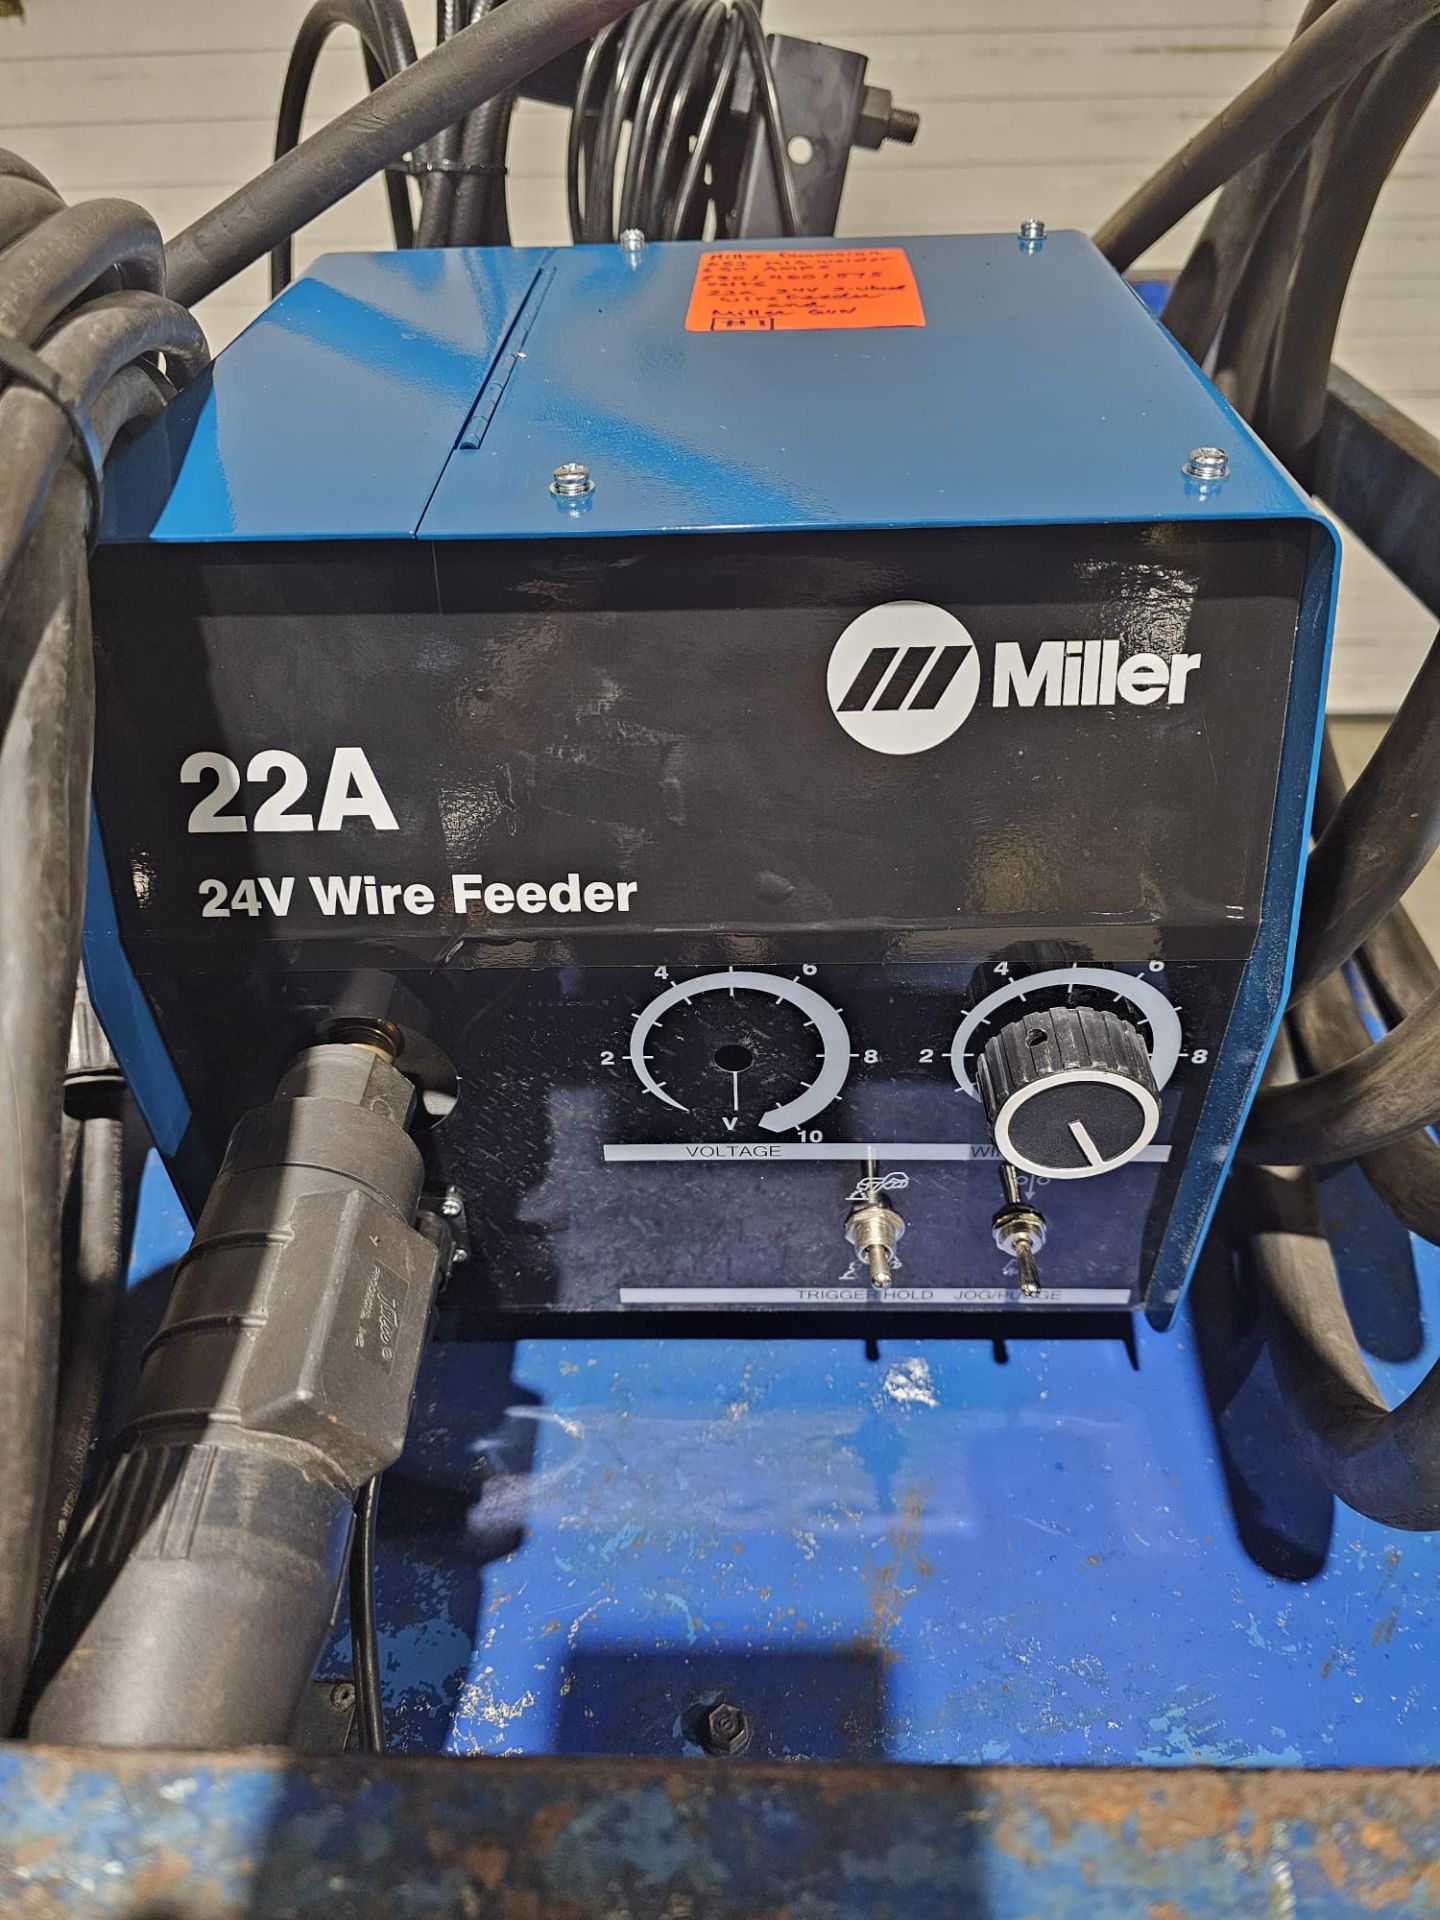 Miller Dimension 652 Mig Welder 650 Amp Mig Tig Stick Multi Process Power Source with 22A Wire - Image 4 of 6